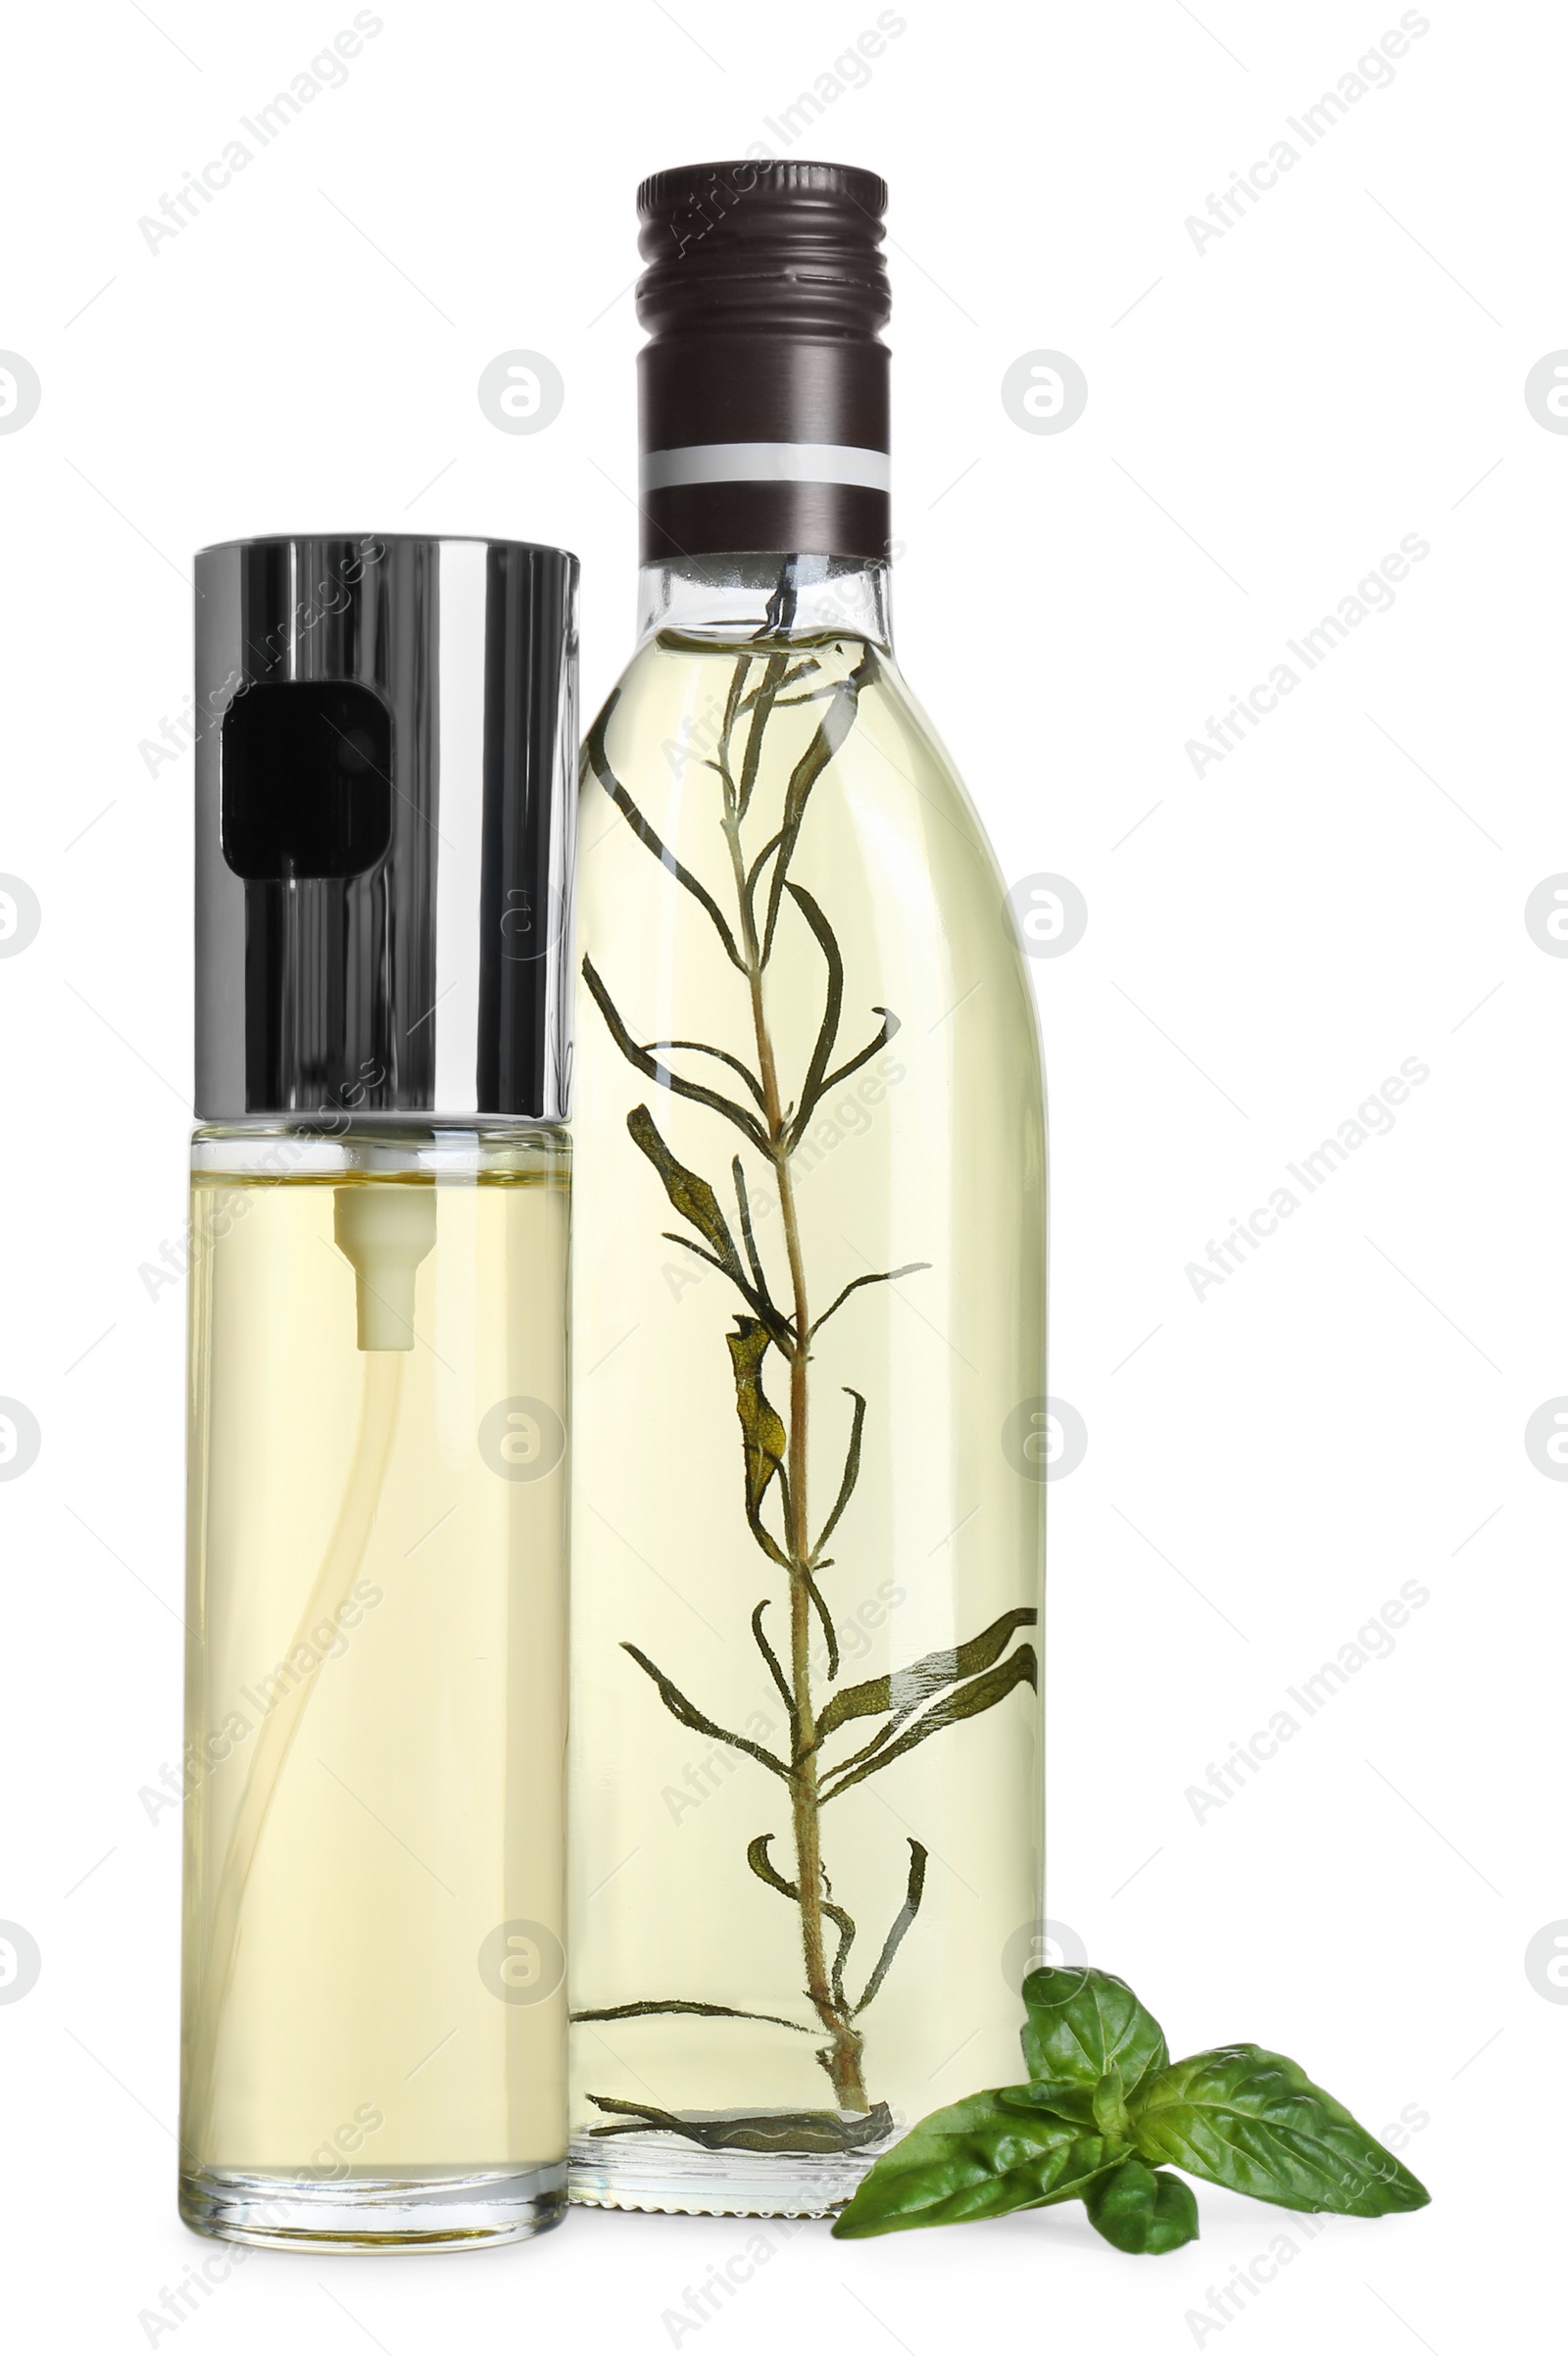 Photo of Bottles of cooking oil and basil leaves on white background